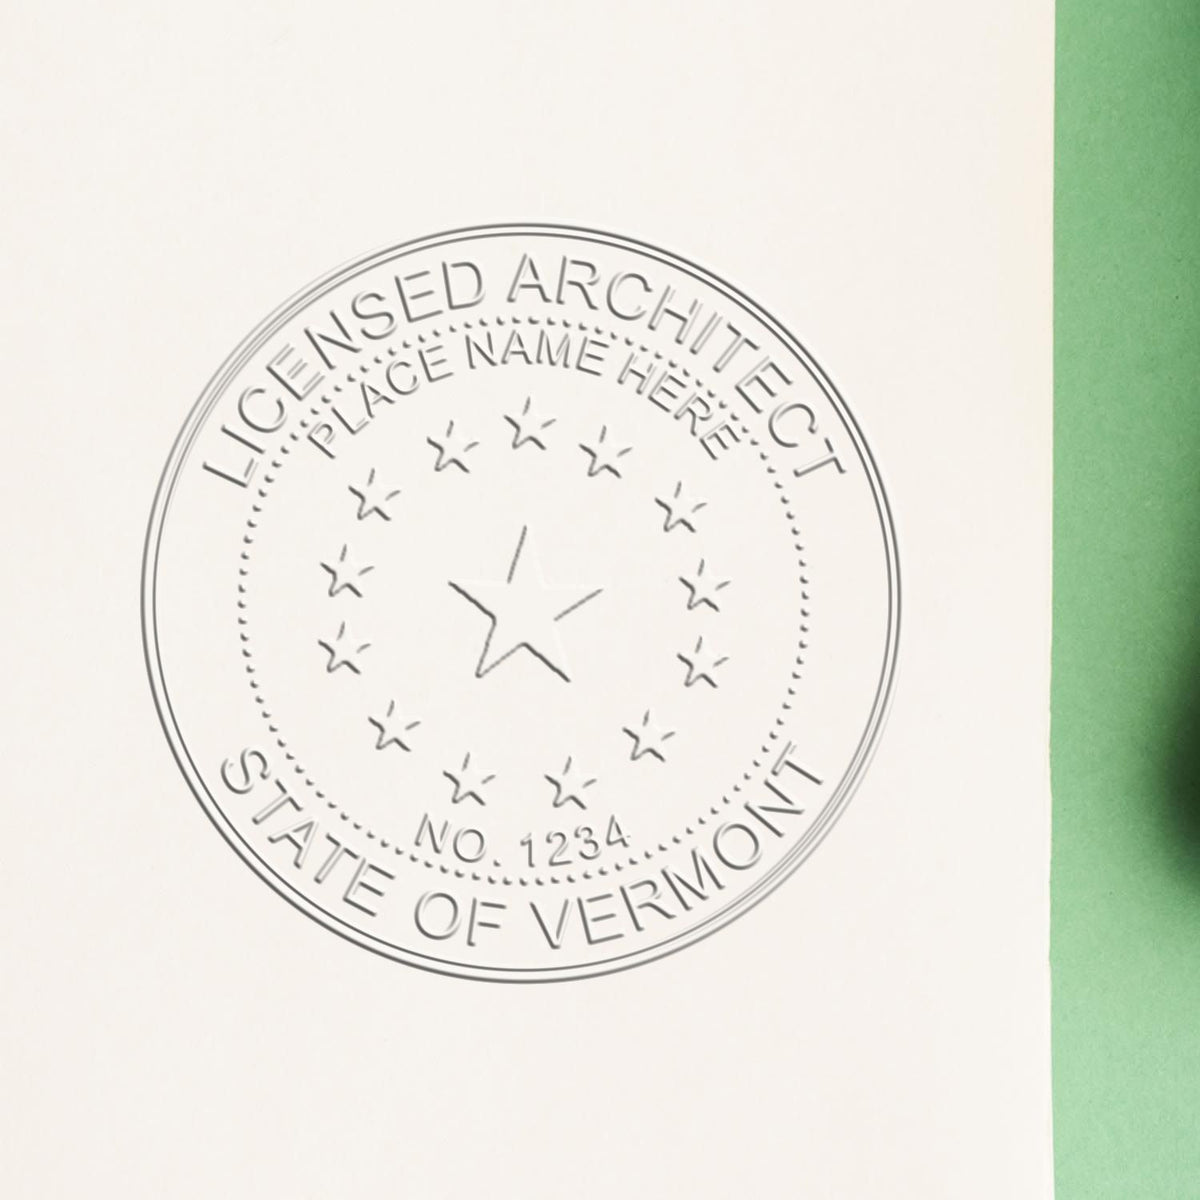 An alternative view of the State of Vermont Long Reach Architectural Embossing Seal stamped on a sheet of paper showing the image in use